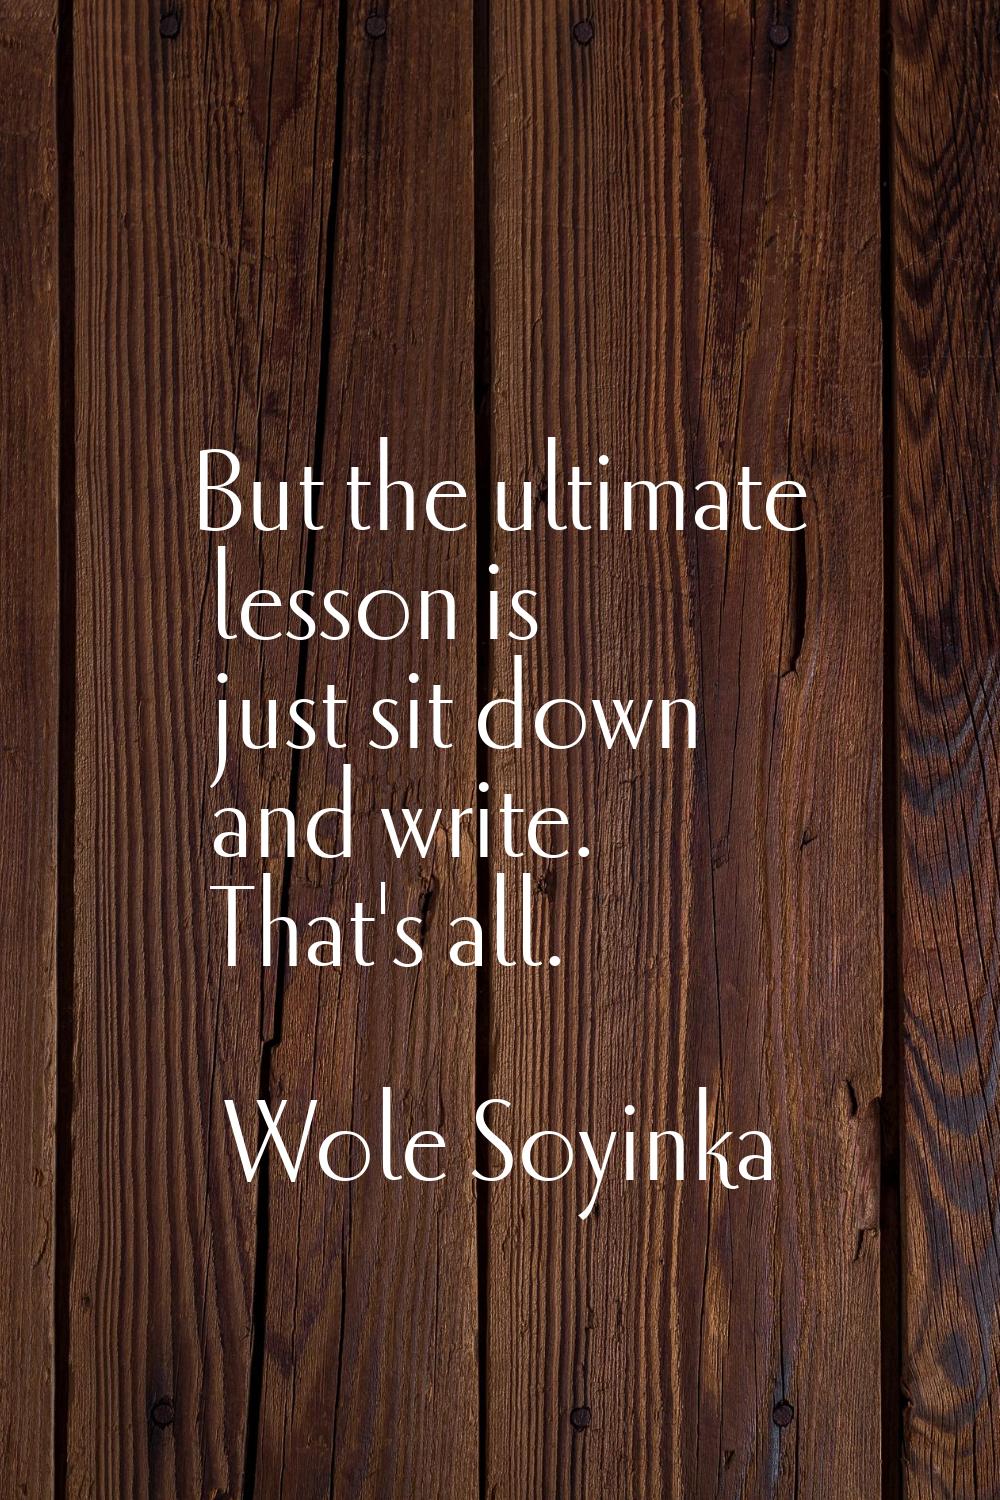 But the ultimate lesson is just sit down and write. That's all.